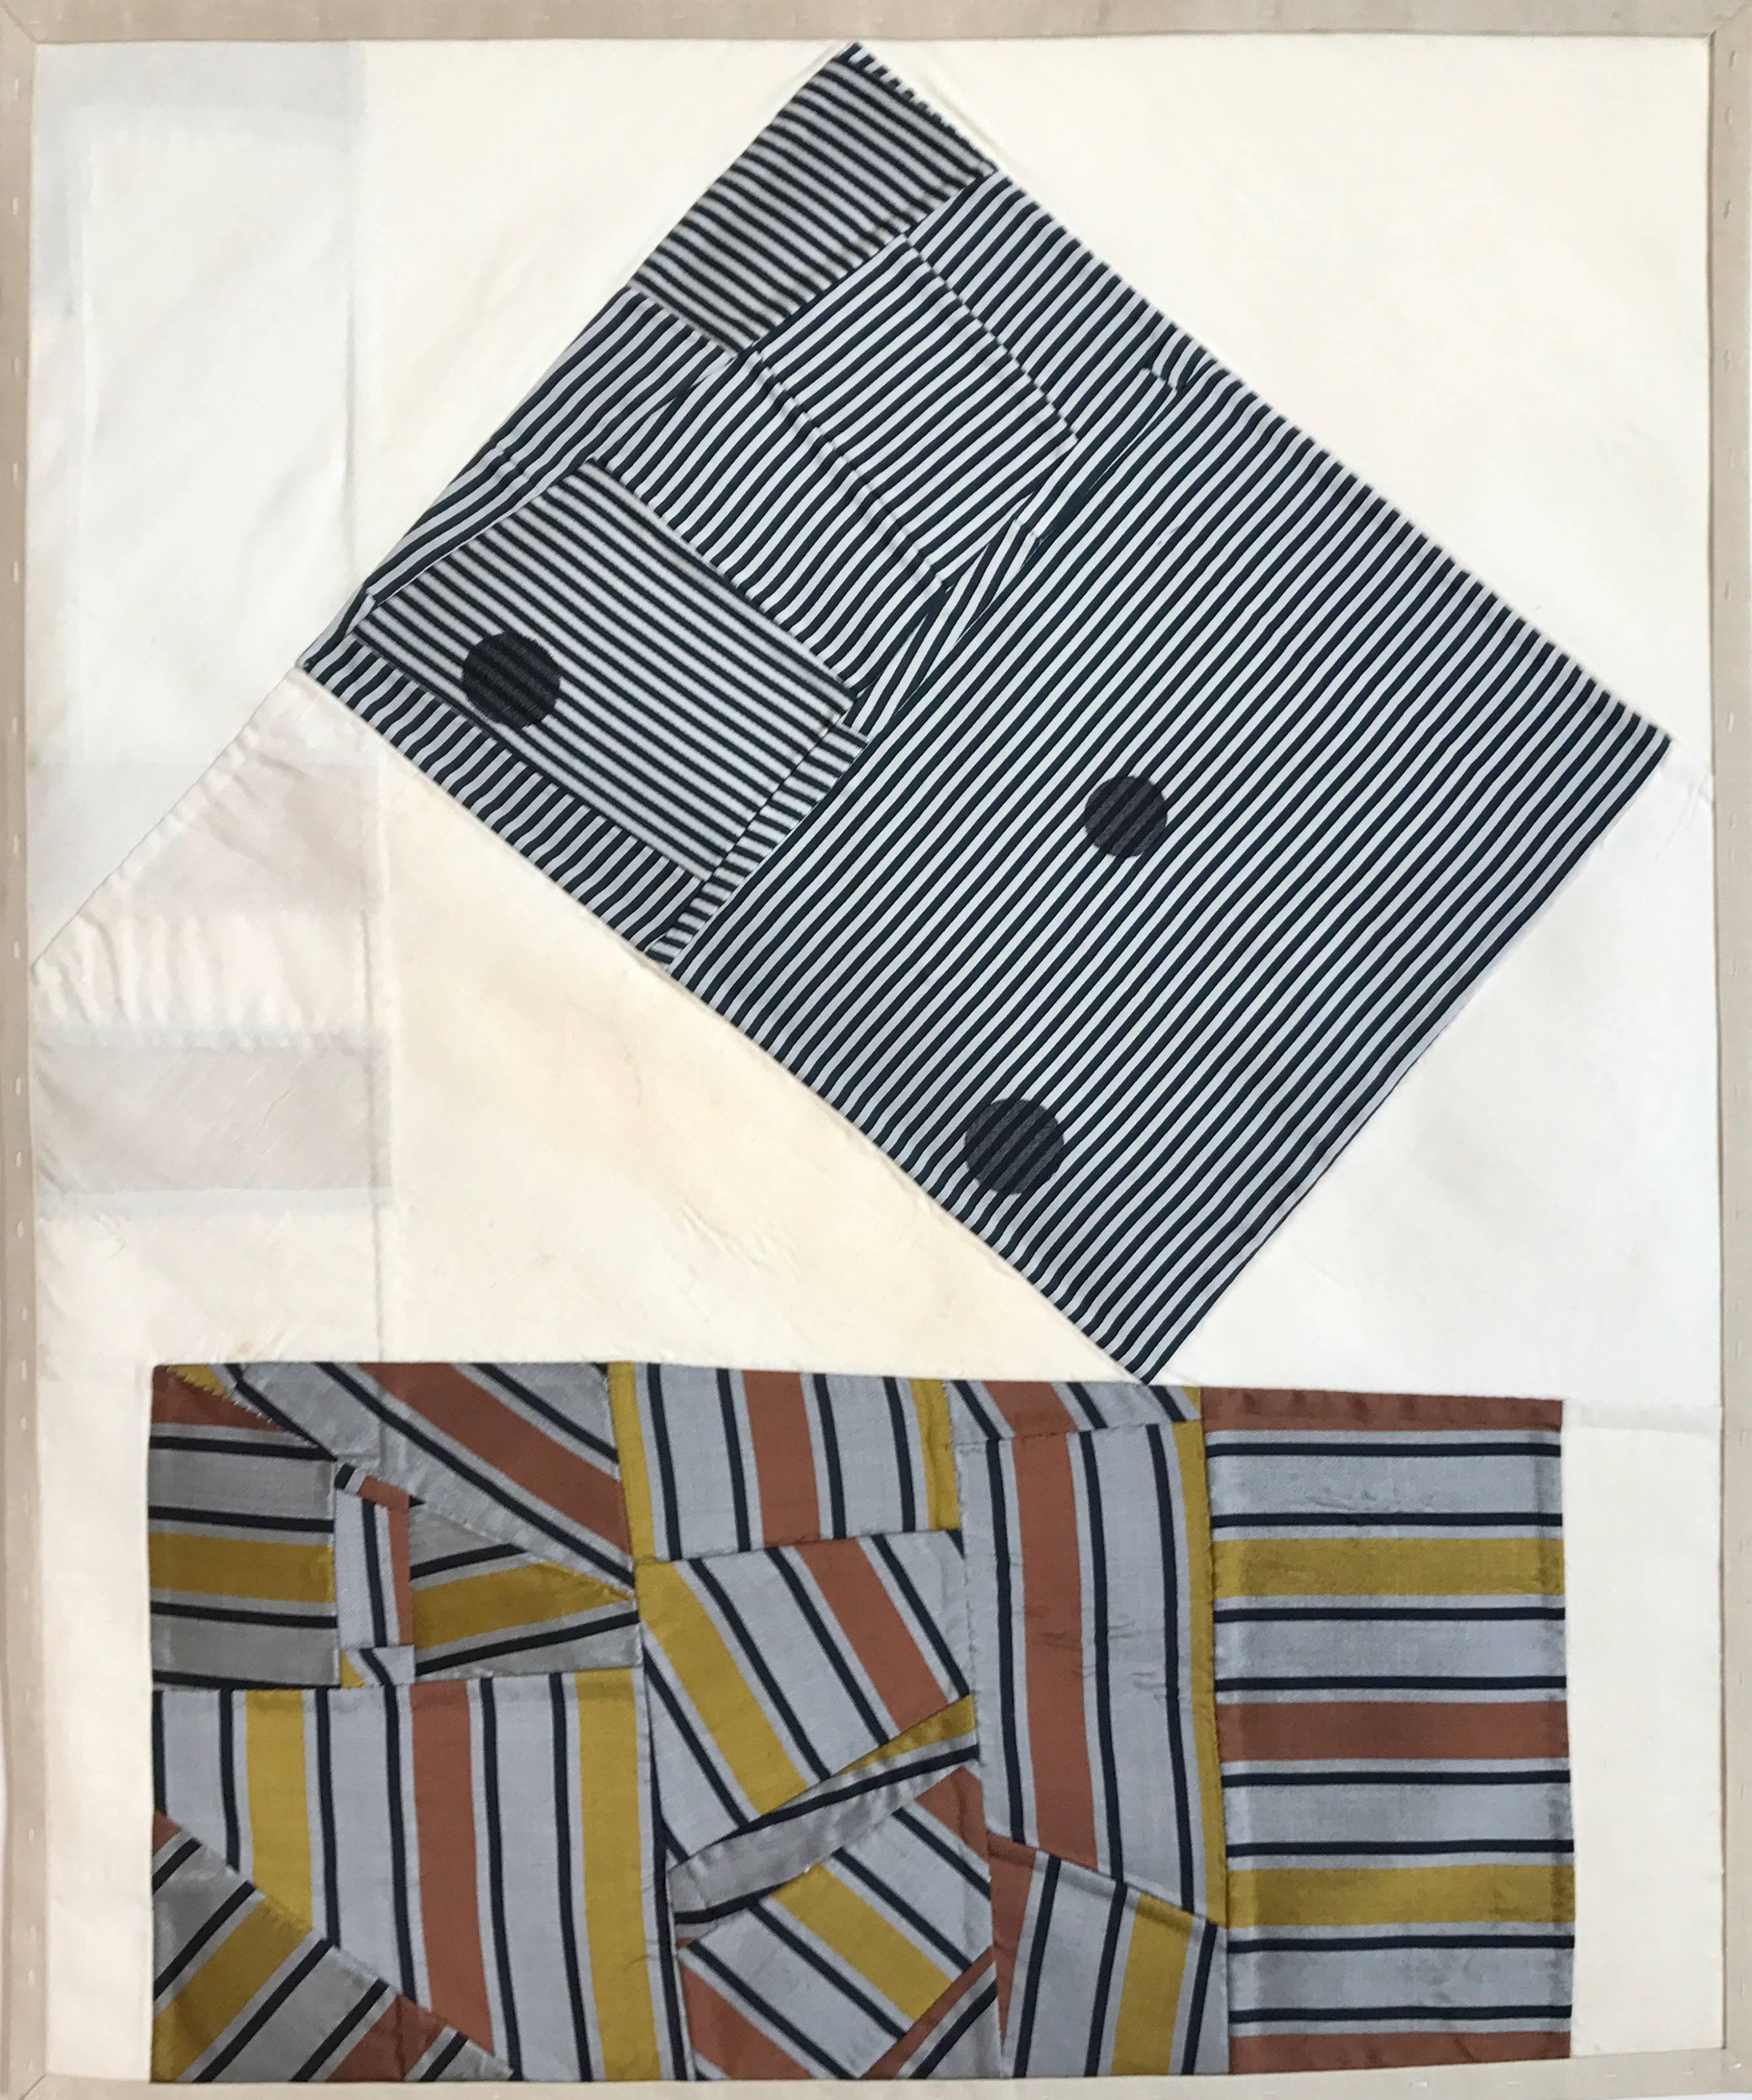 Debra Smith
Shifting Color Series no.32, 2017
pieced vintage silk
20 x 15 in.

This original textile collage by Debra Smith is bold and graphic, with a large black and white striped rectangle perched precariously on a rectangle crafted with muted